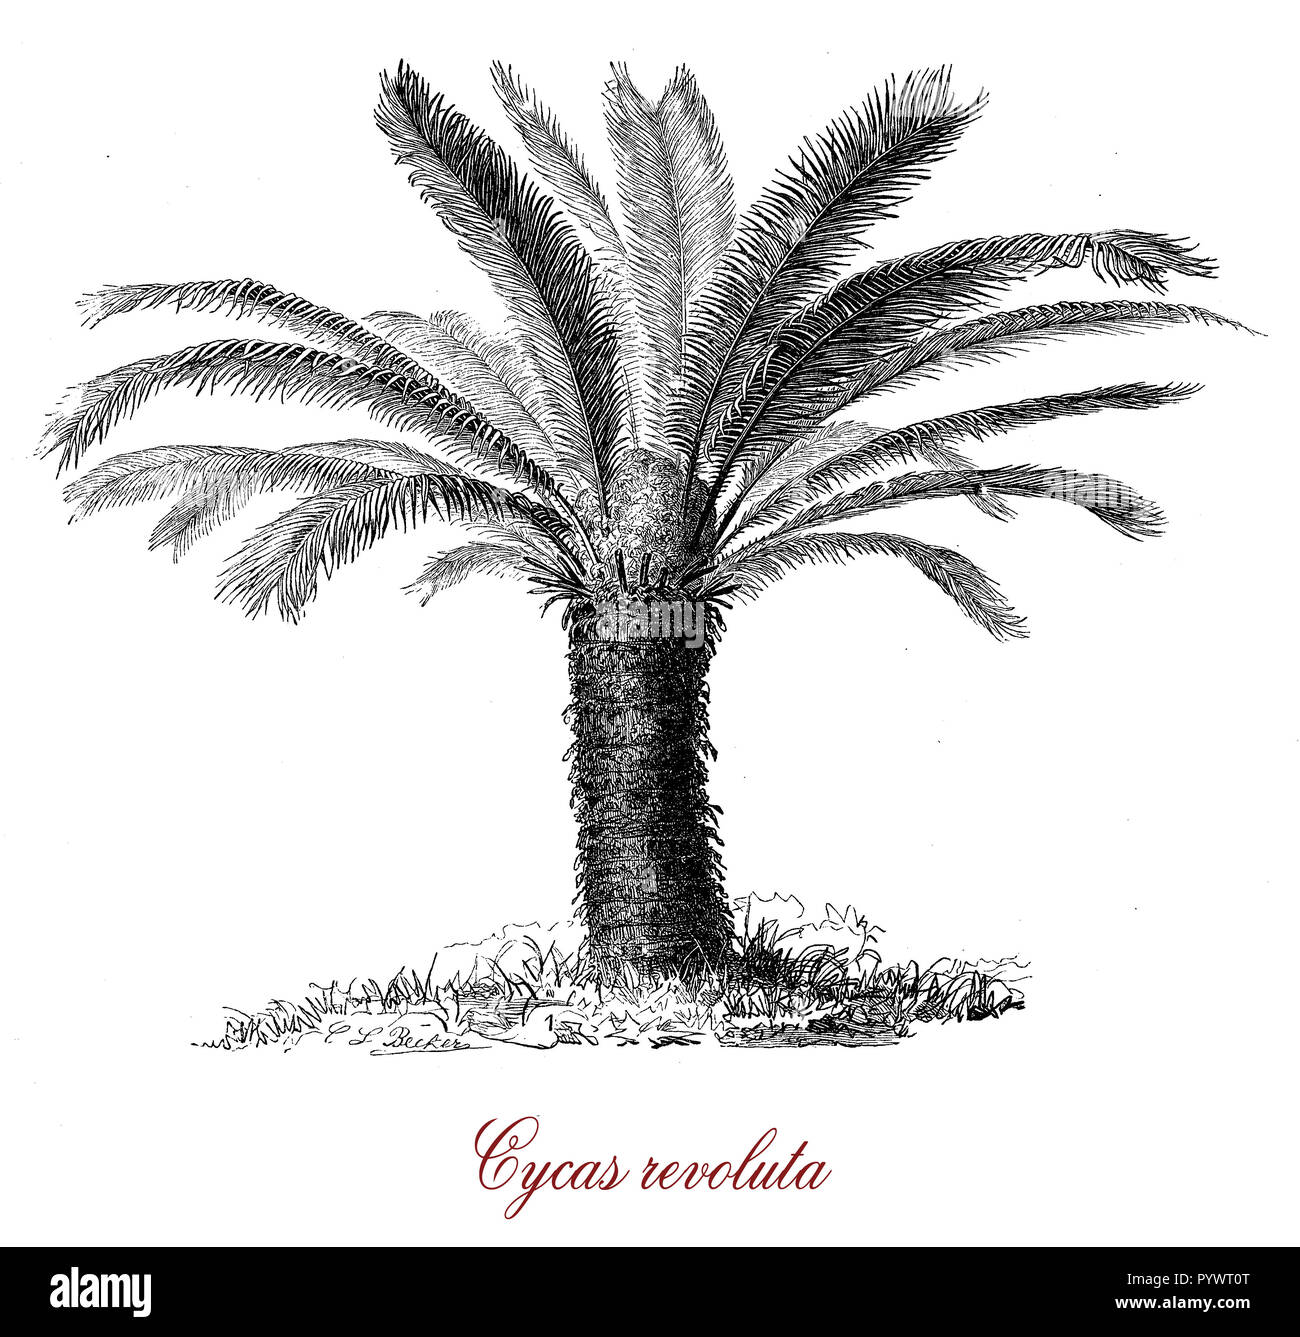 Vintage botanical engraving of  Cycas revoluta or sago palm, native to southern Japan, used for the production of sago and as ornamental plant Stock Photo